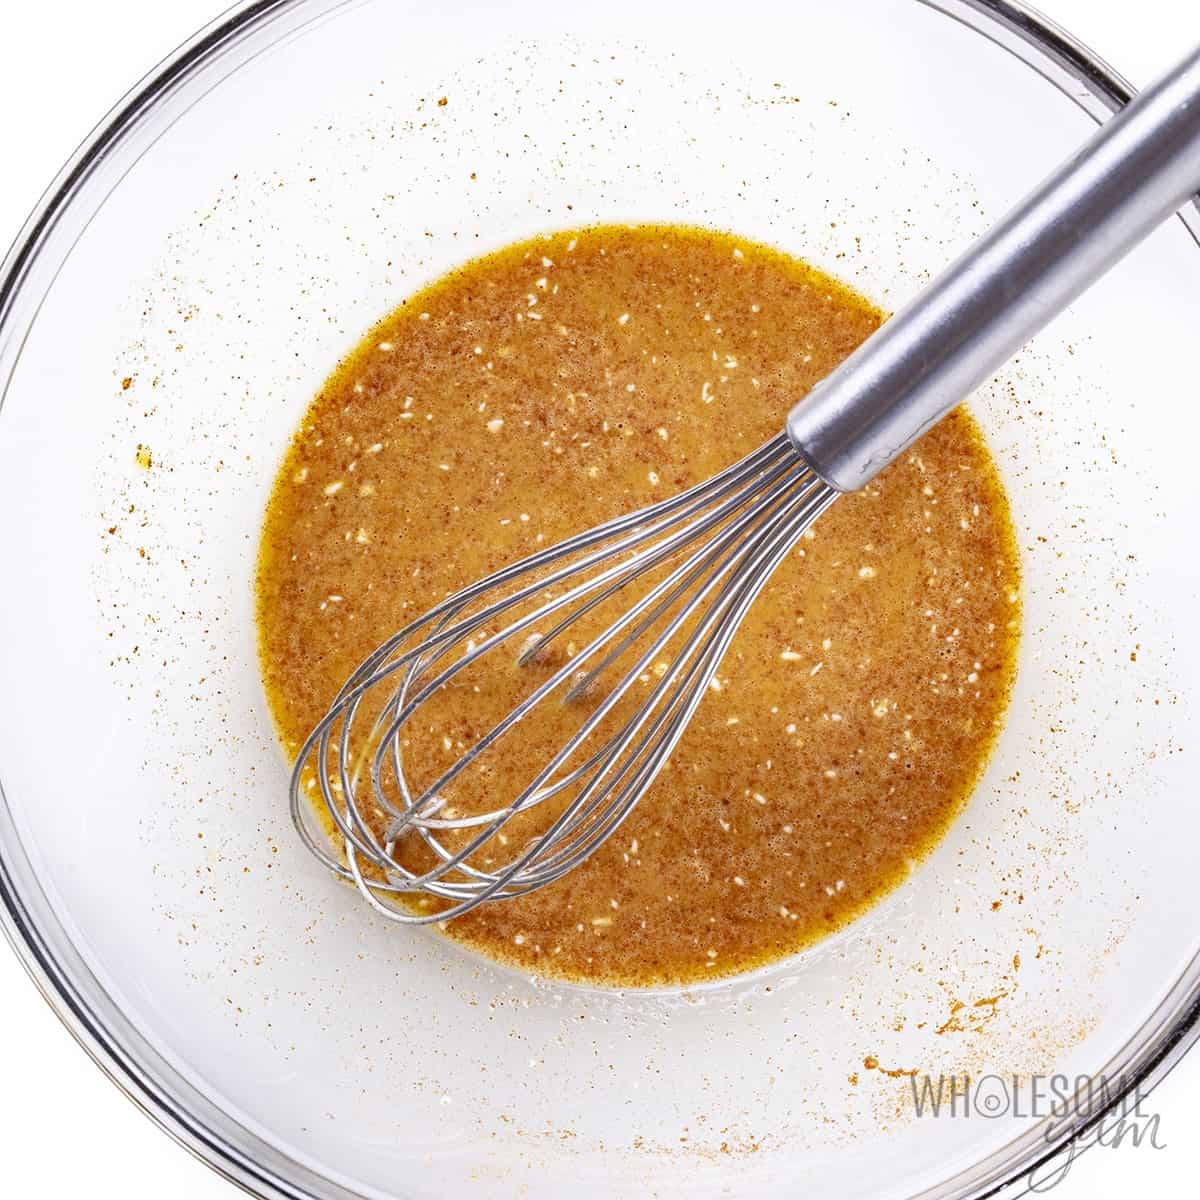 Egg mixture in bowl with whisk